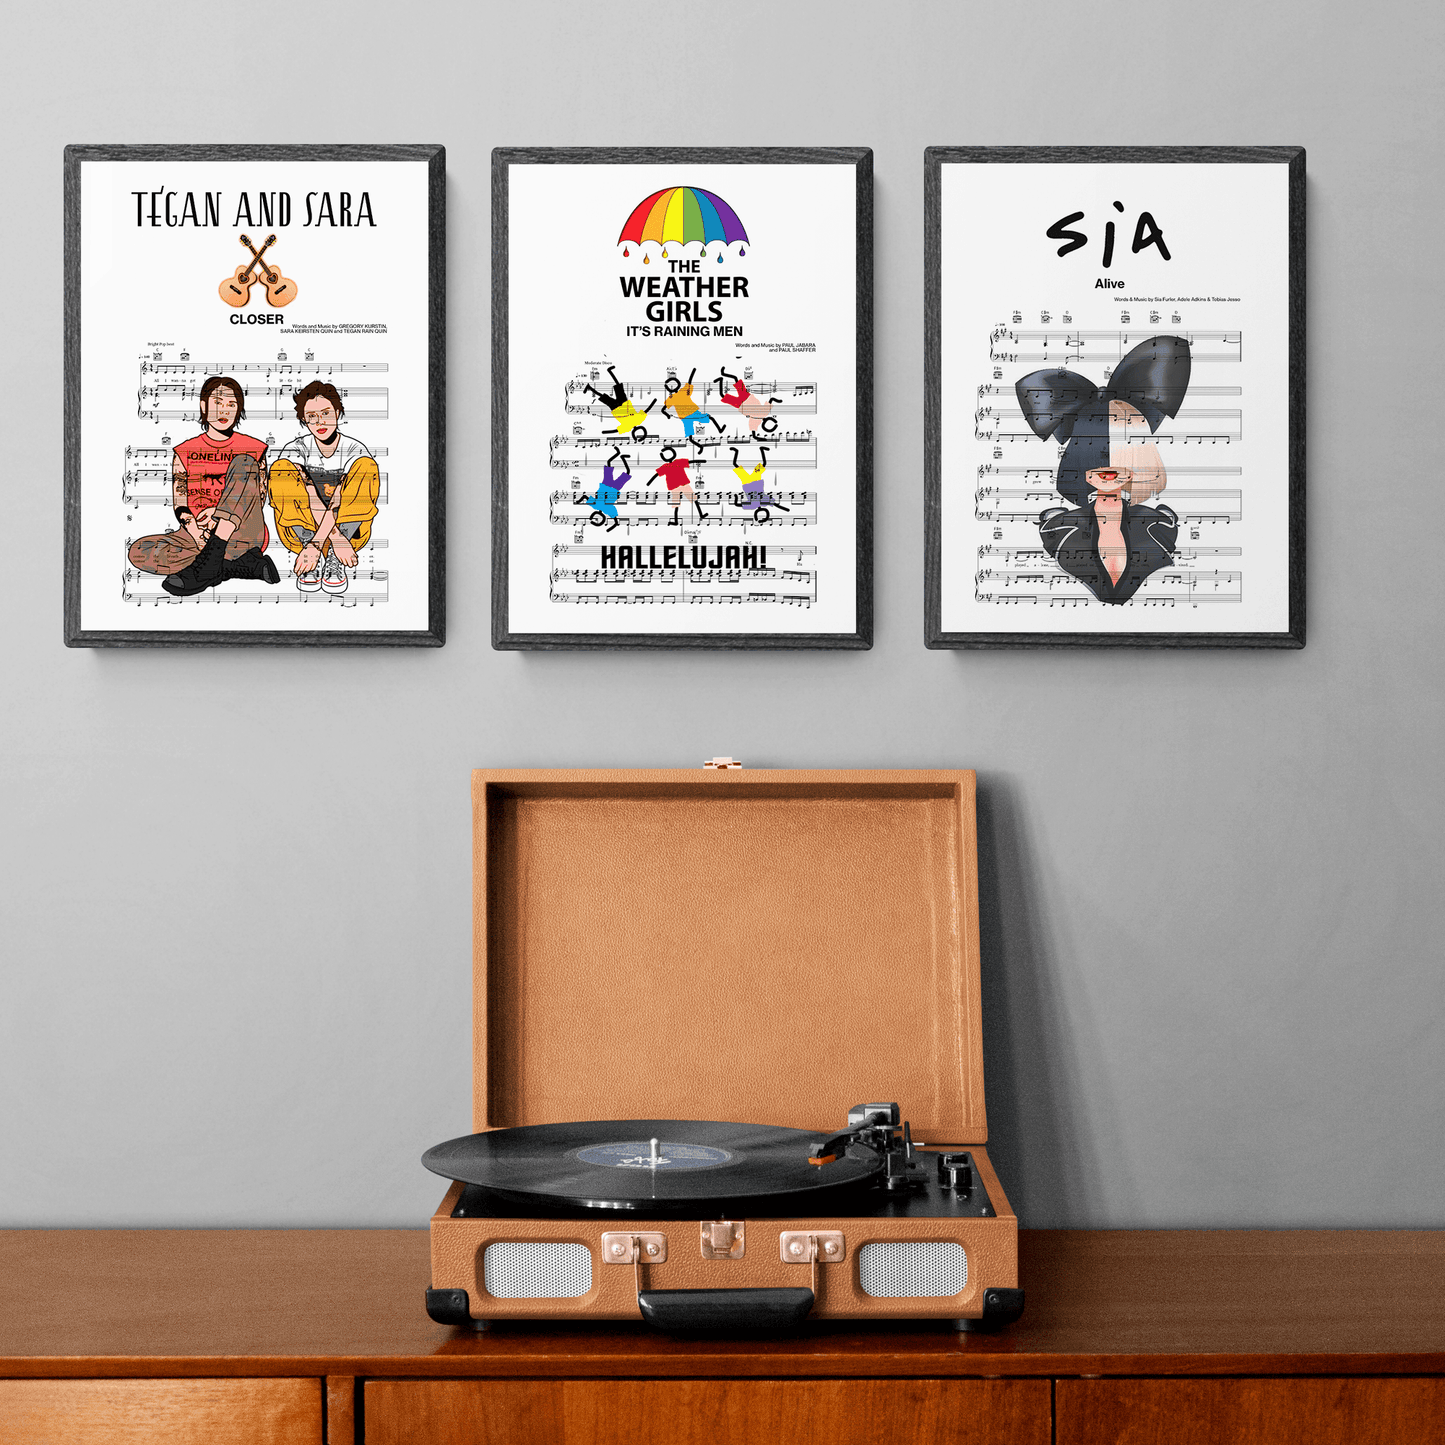 This Sia - Alive Poster is composed of a customised graphical display of song lyrics, making it an excellent decorative piece ideal for expressing a passion for music through high-grade, artful prints. It is a perfect complement for any wall.